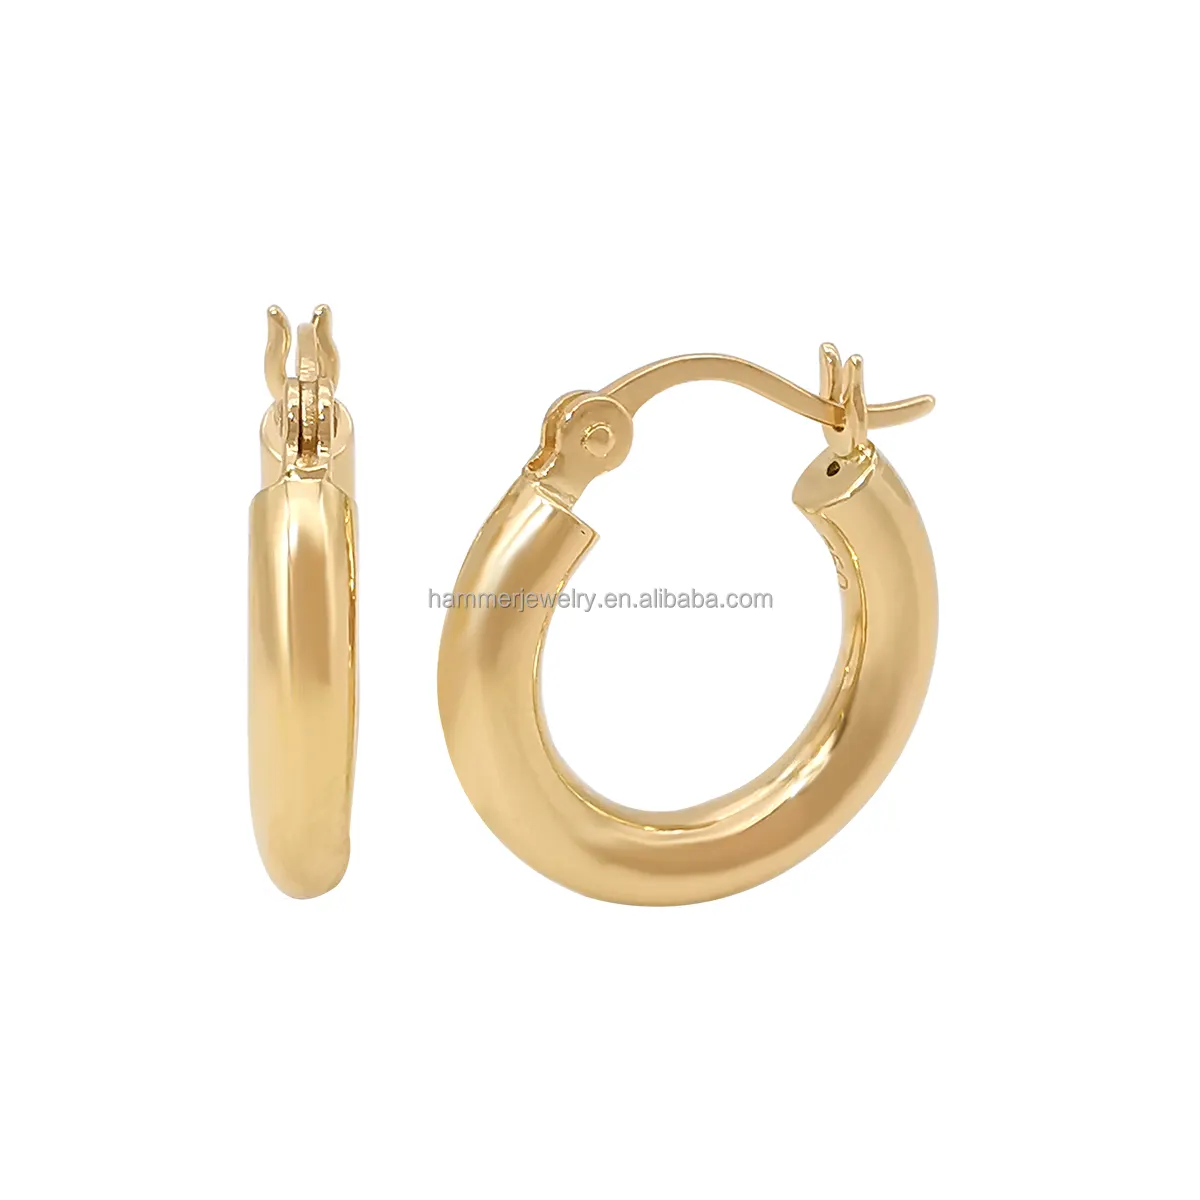 18k Real Gold Earrings Classic design AU750 Gold Minimal Huggie Hoops 16mm 22mm 26mm Round Circle Earrings For Women